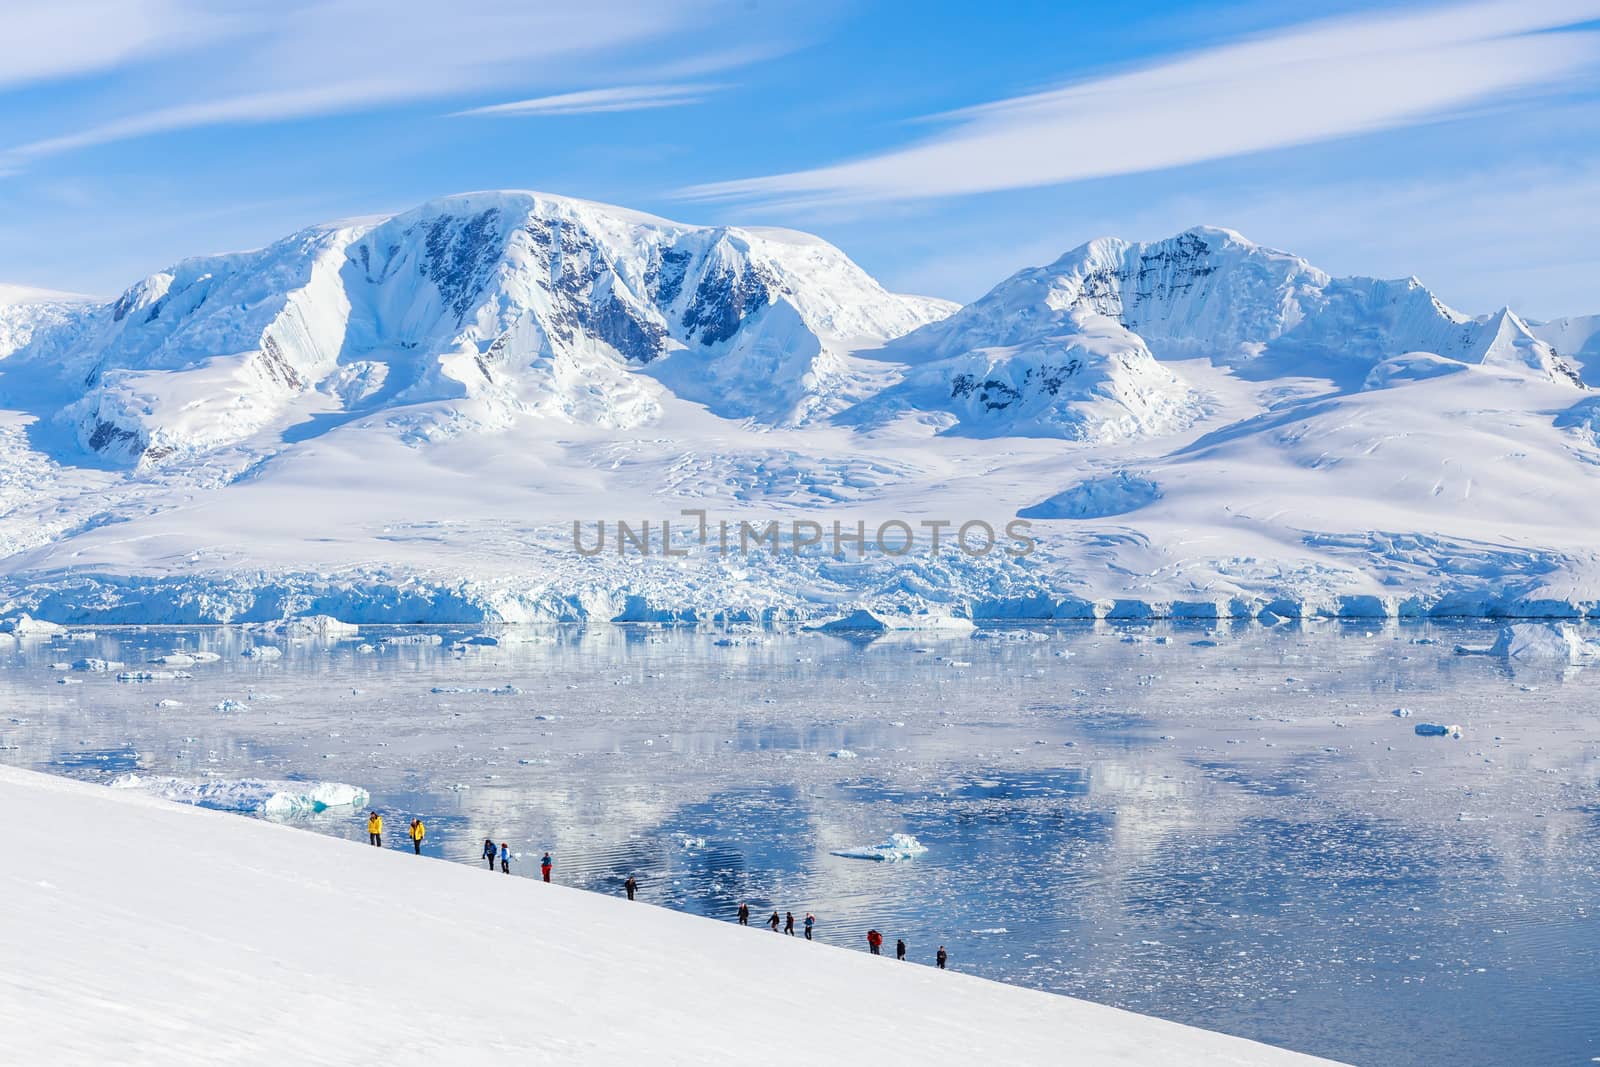 Group of people hiking the snowy mountains, Neco bay, Antarctic by ambeon